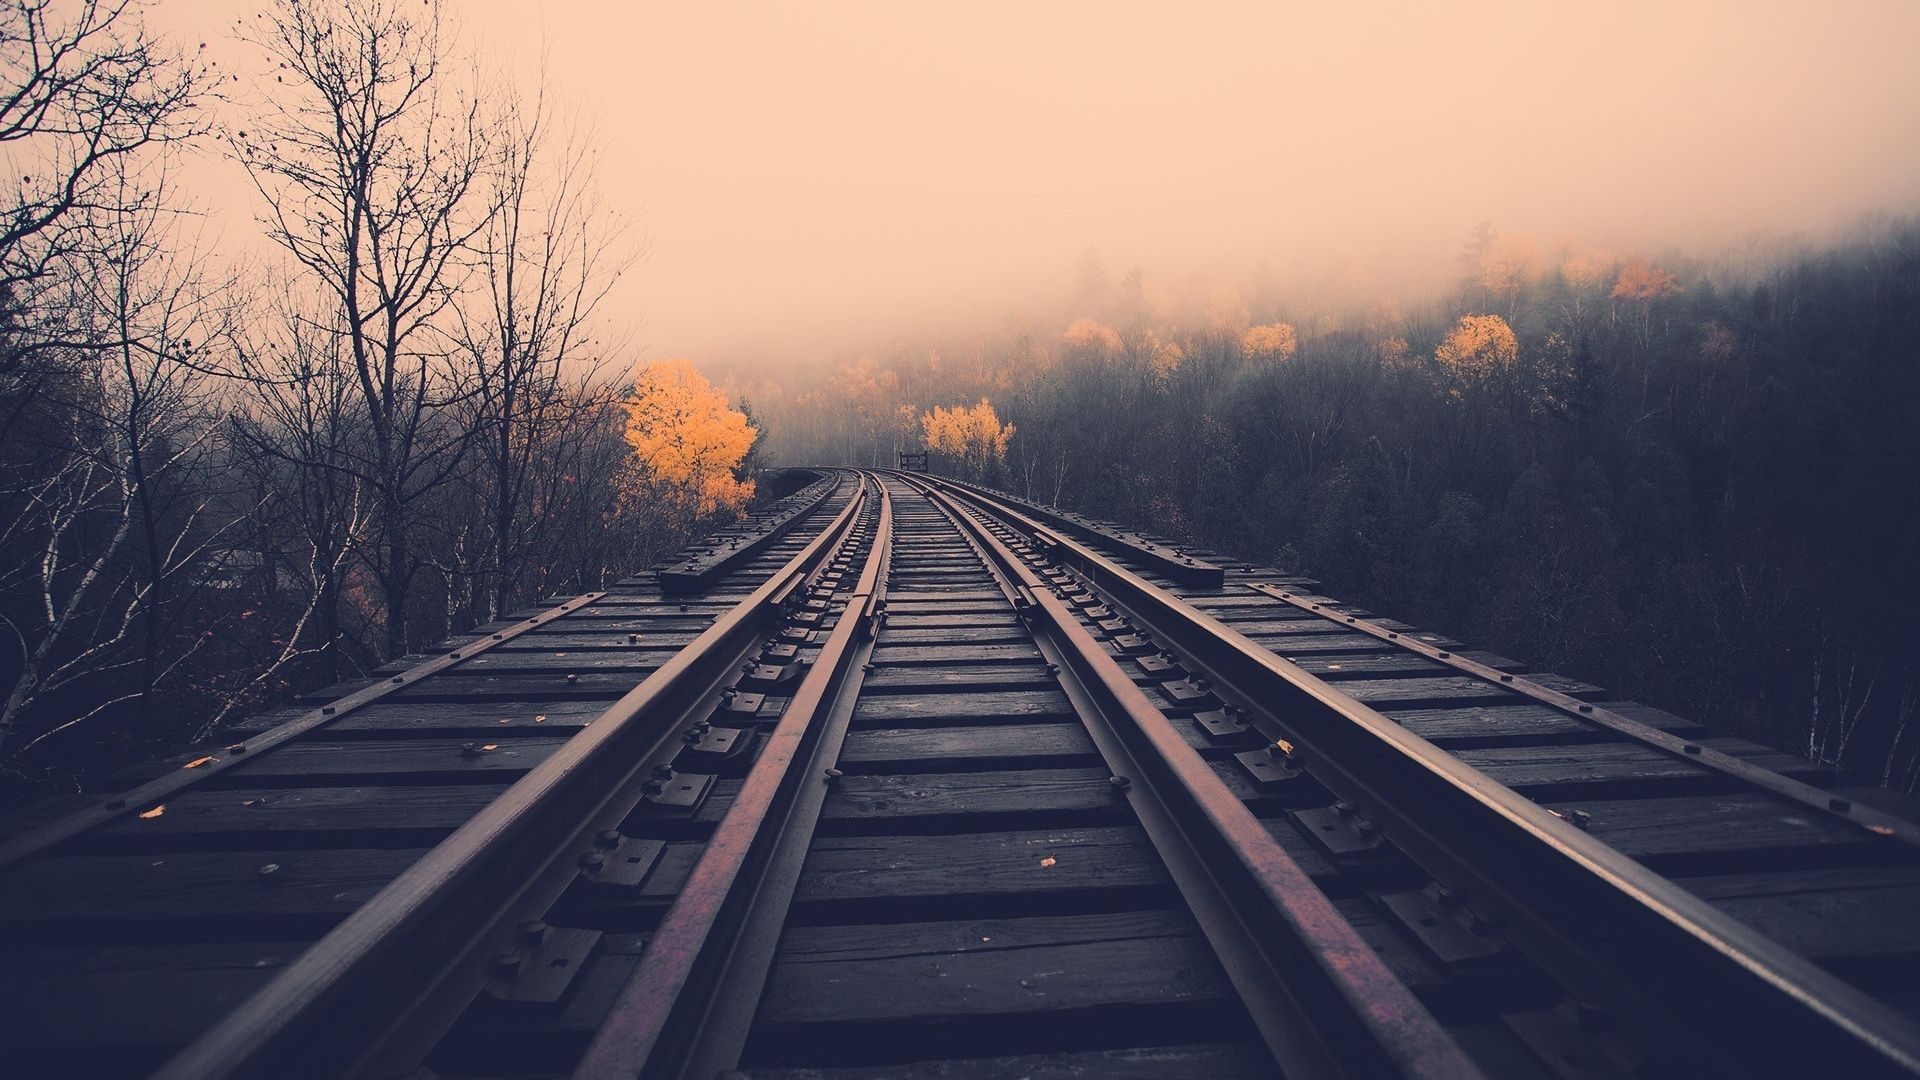 Free download train tracks railroad stell metal trees landscapes autumn fall haze [1920x1200] for your Desktop, Mobile & Tablet. Explore Train Track Wallpaper. Train Background Wallpaper, Railroad Wallpaper Desktop